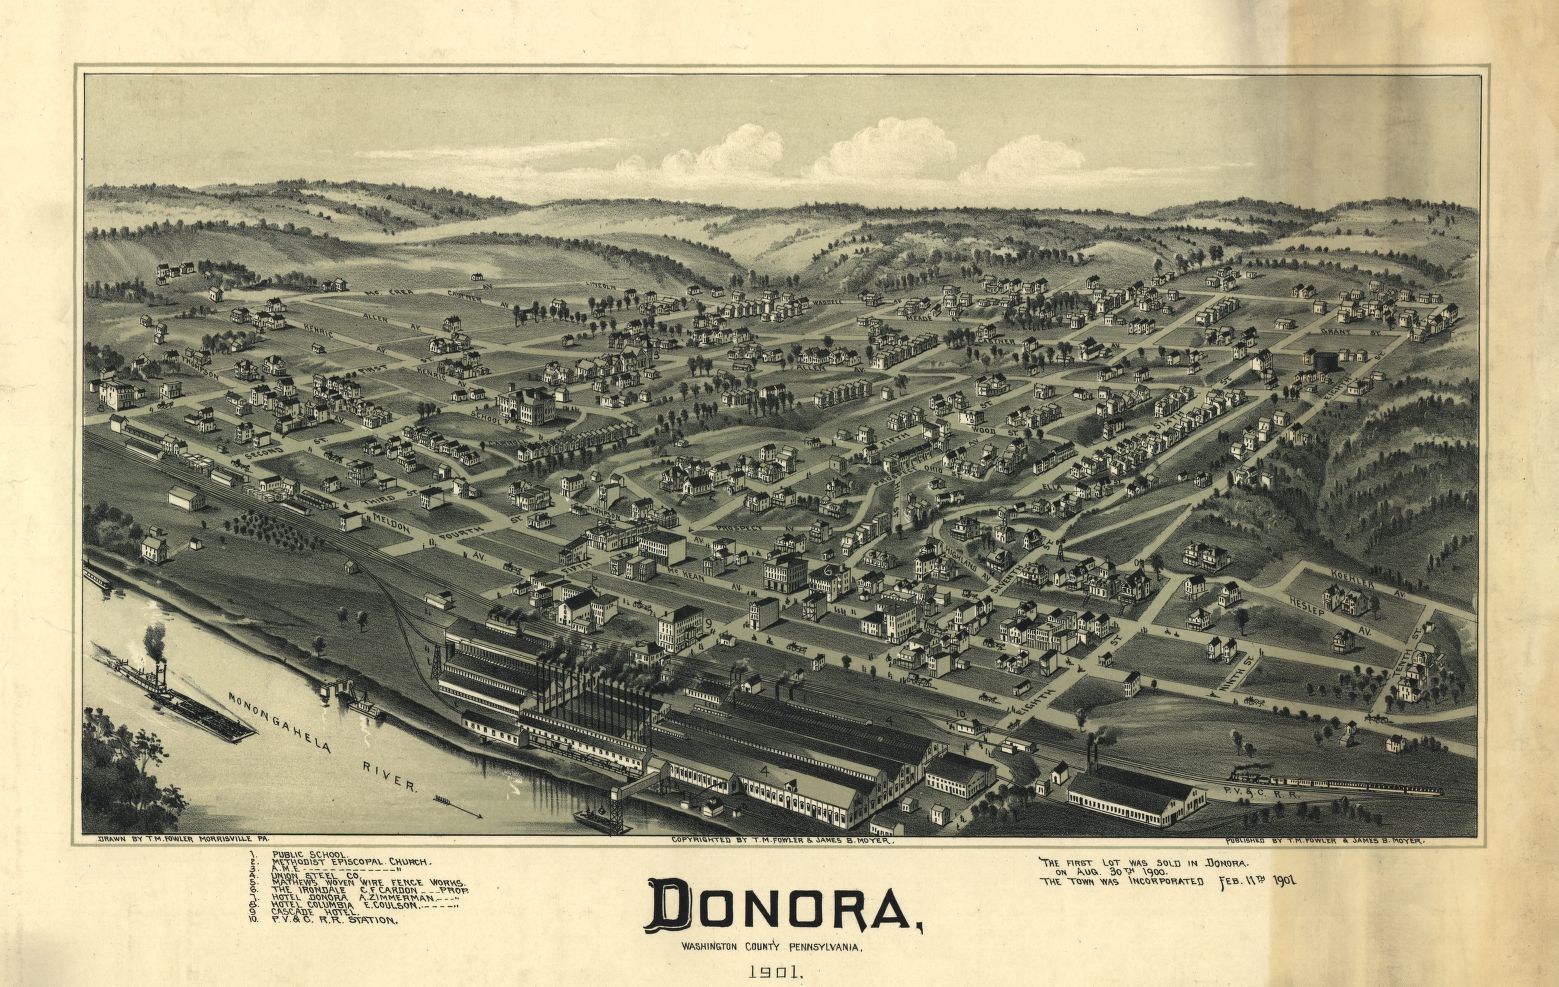 Pictorial map of Donora, Pennsylvania, made in 1901.  Public Domain.